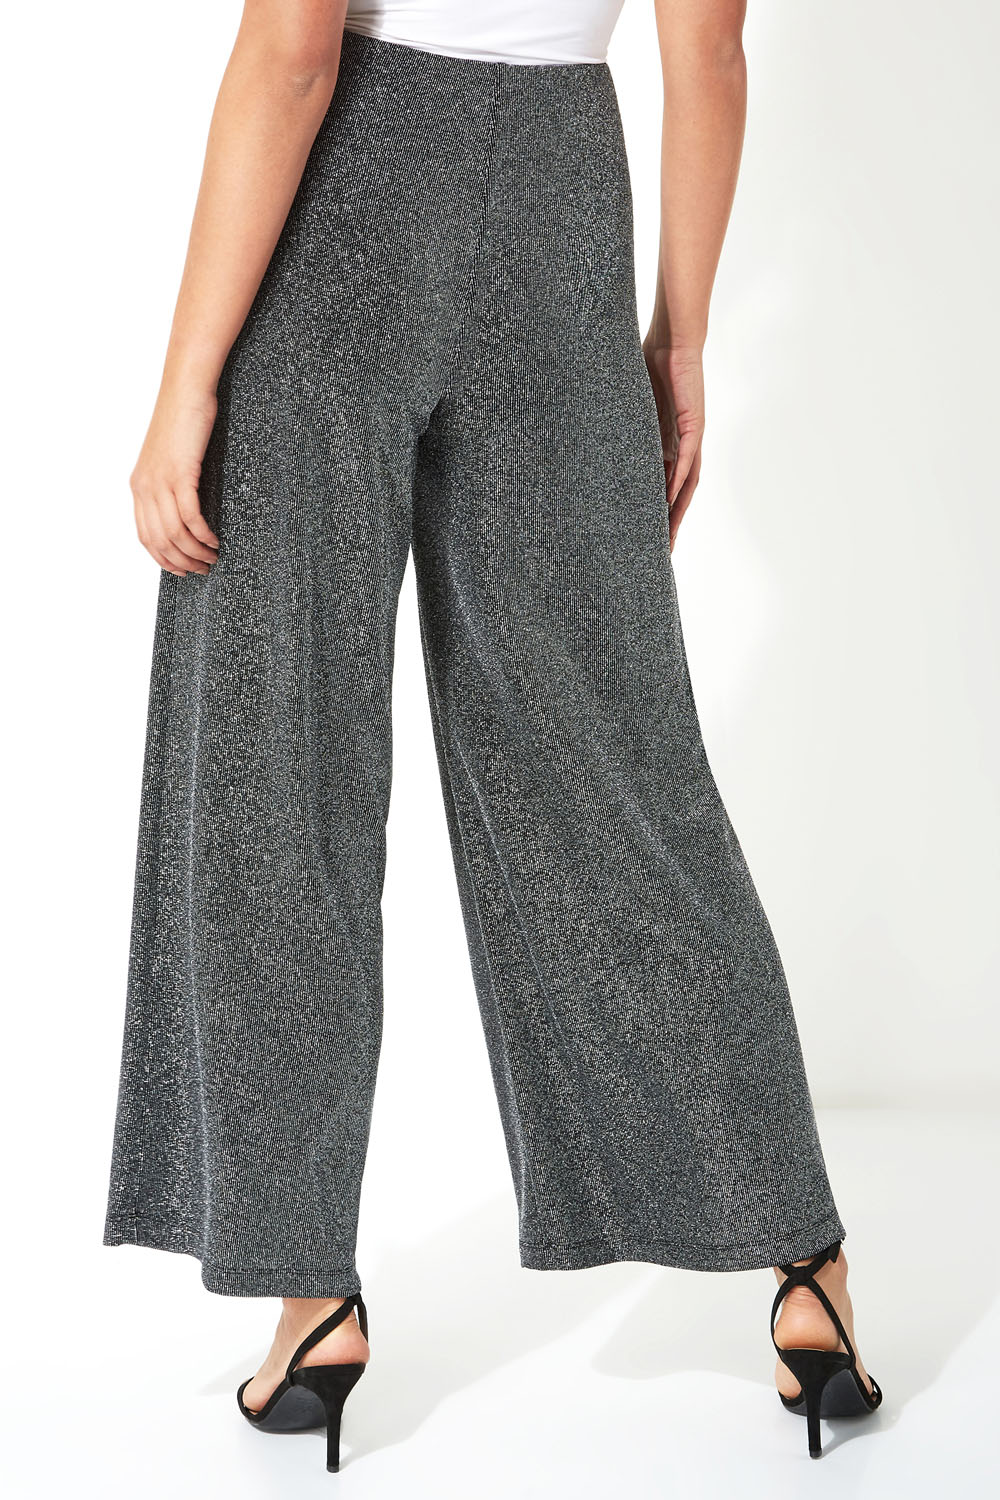 Silver Sparkle Wide Leg Trousers , Image 2 of 5